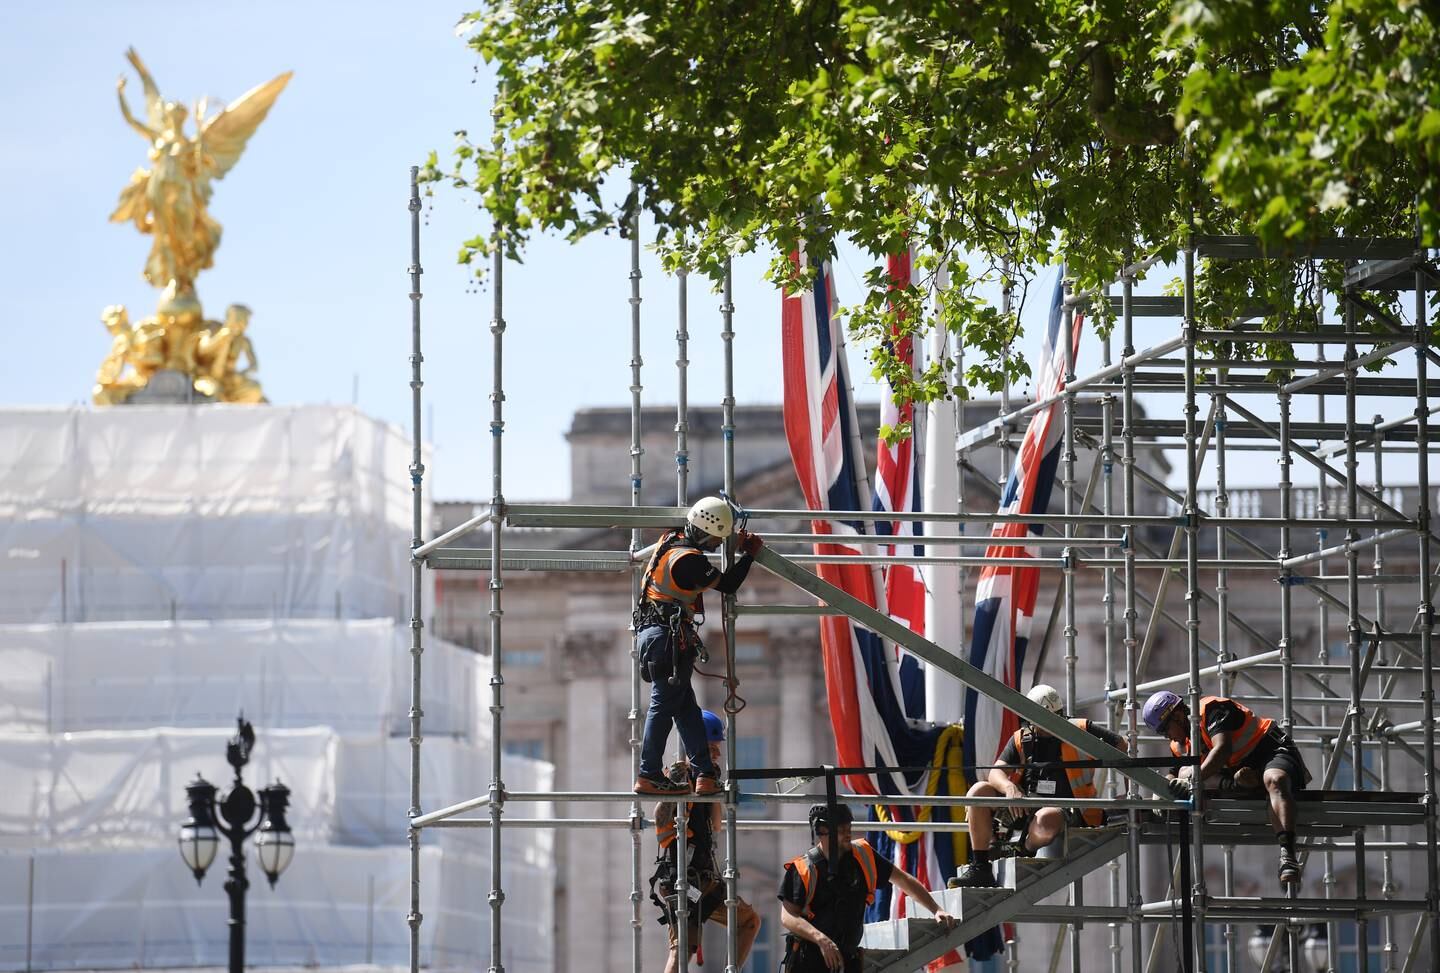 Preparations are under way outside Buckingham Palace for the platinum jubilee celebrations in June. EPA